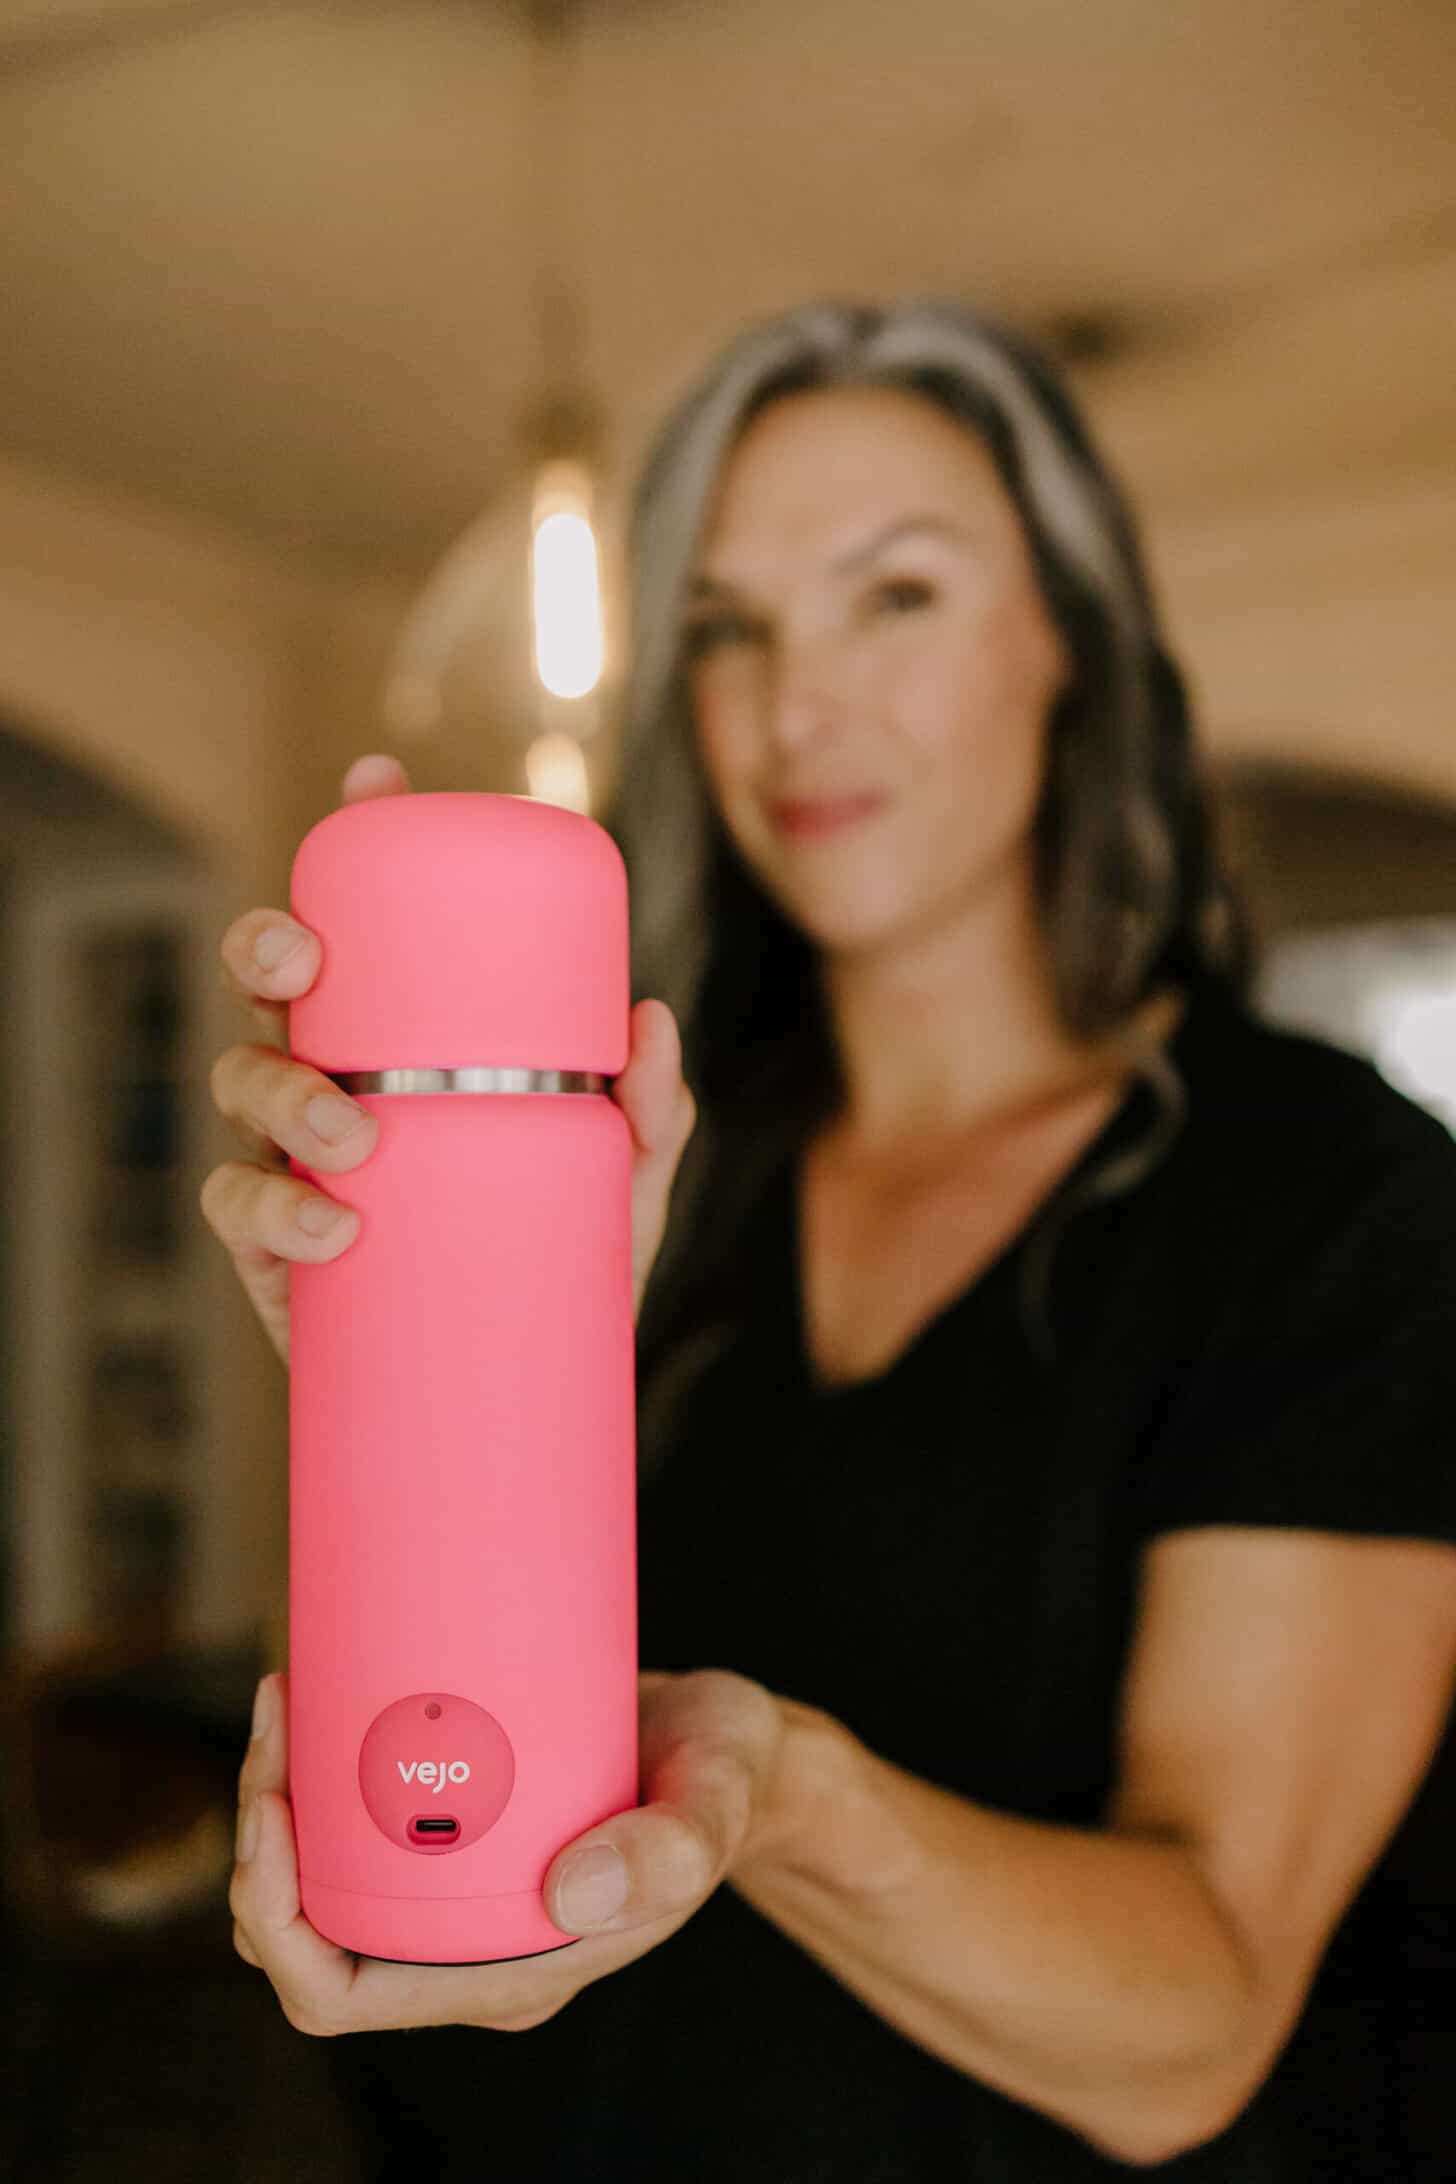 a woman in the background holds up a hot pink portable blender